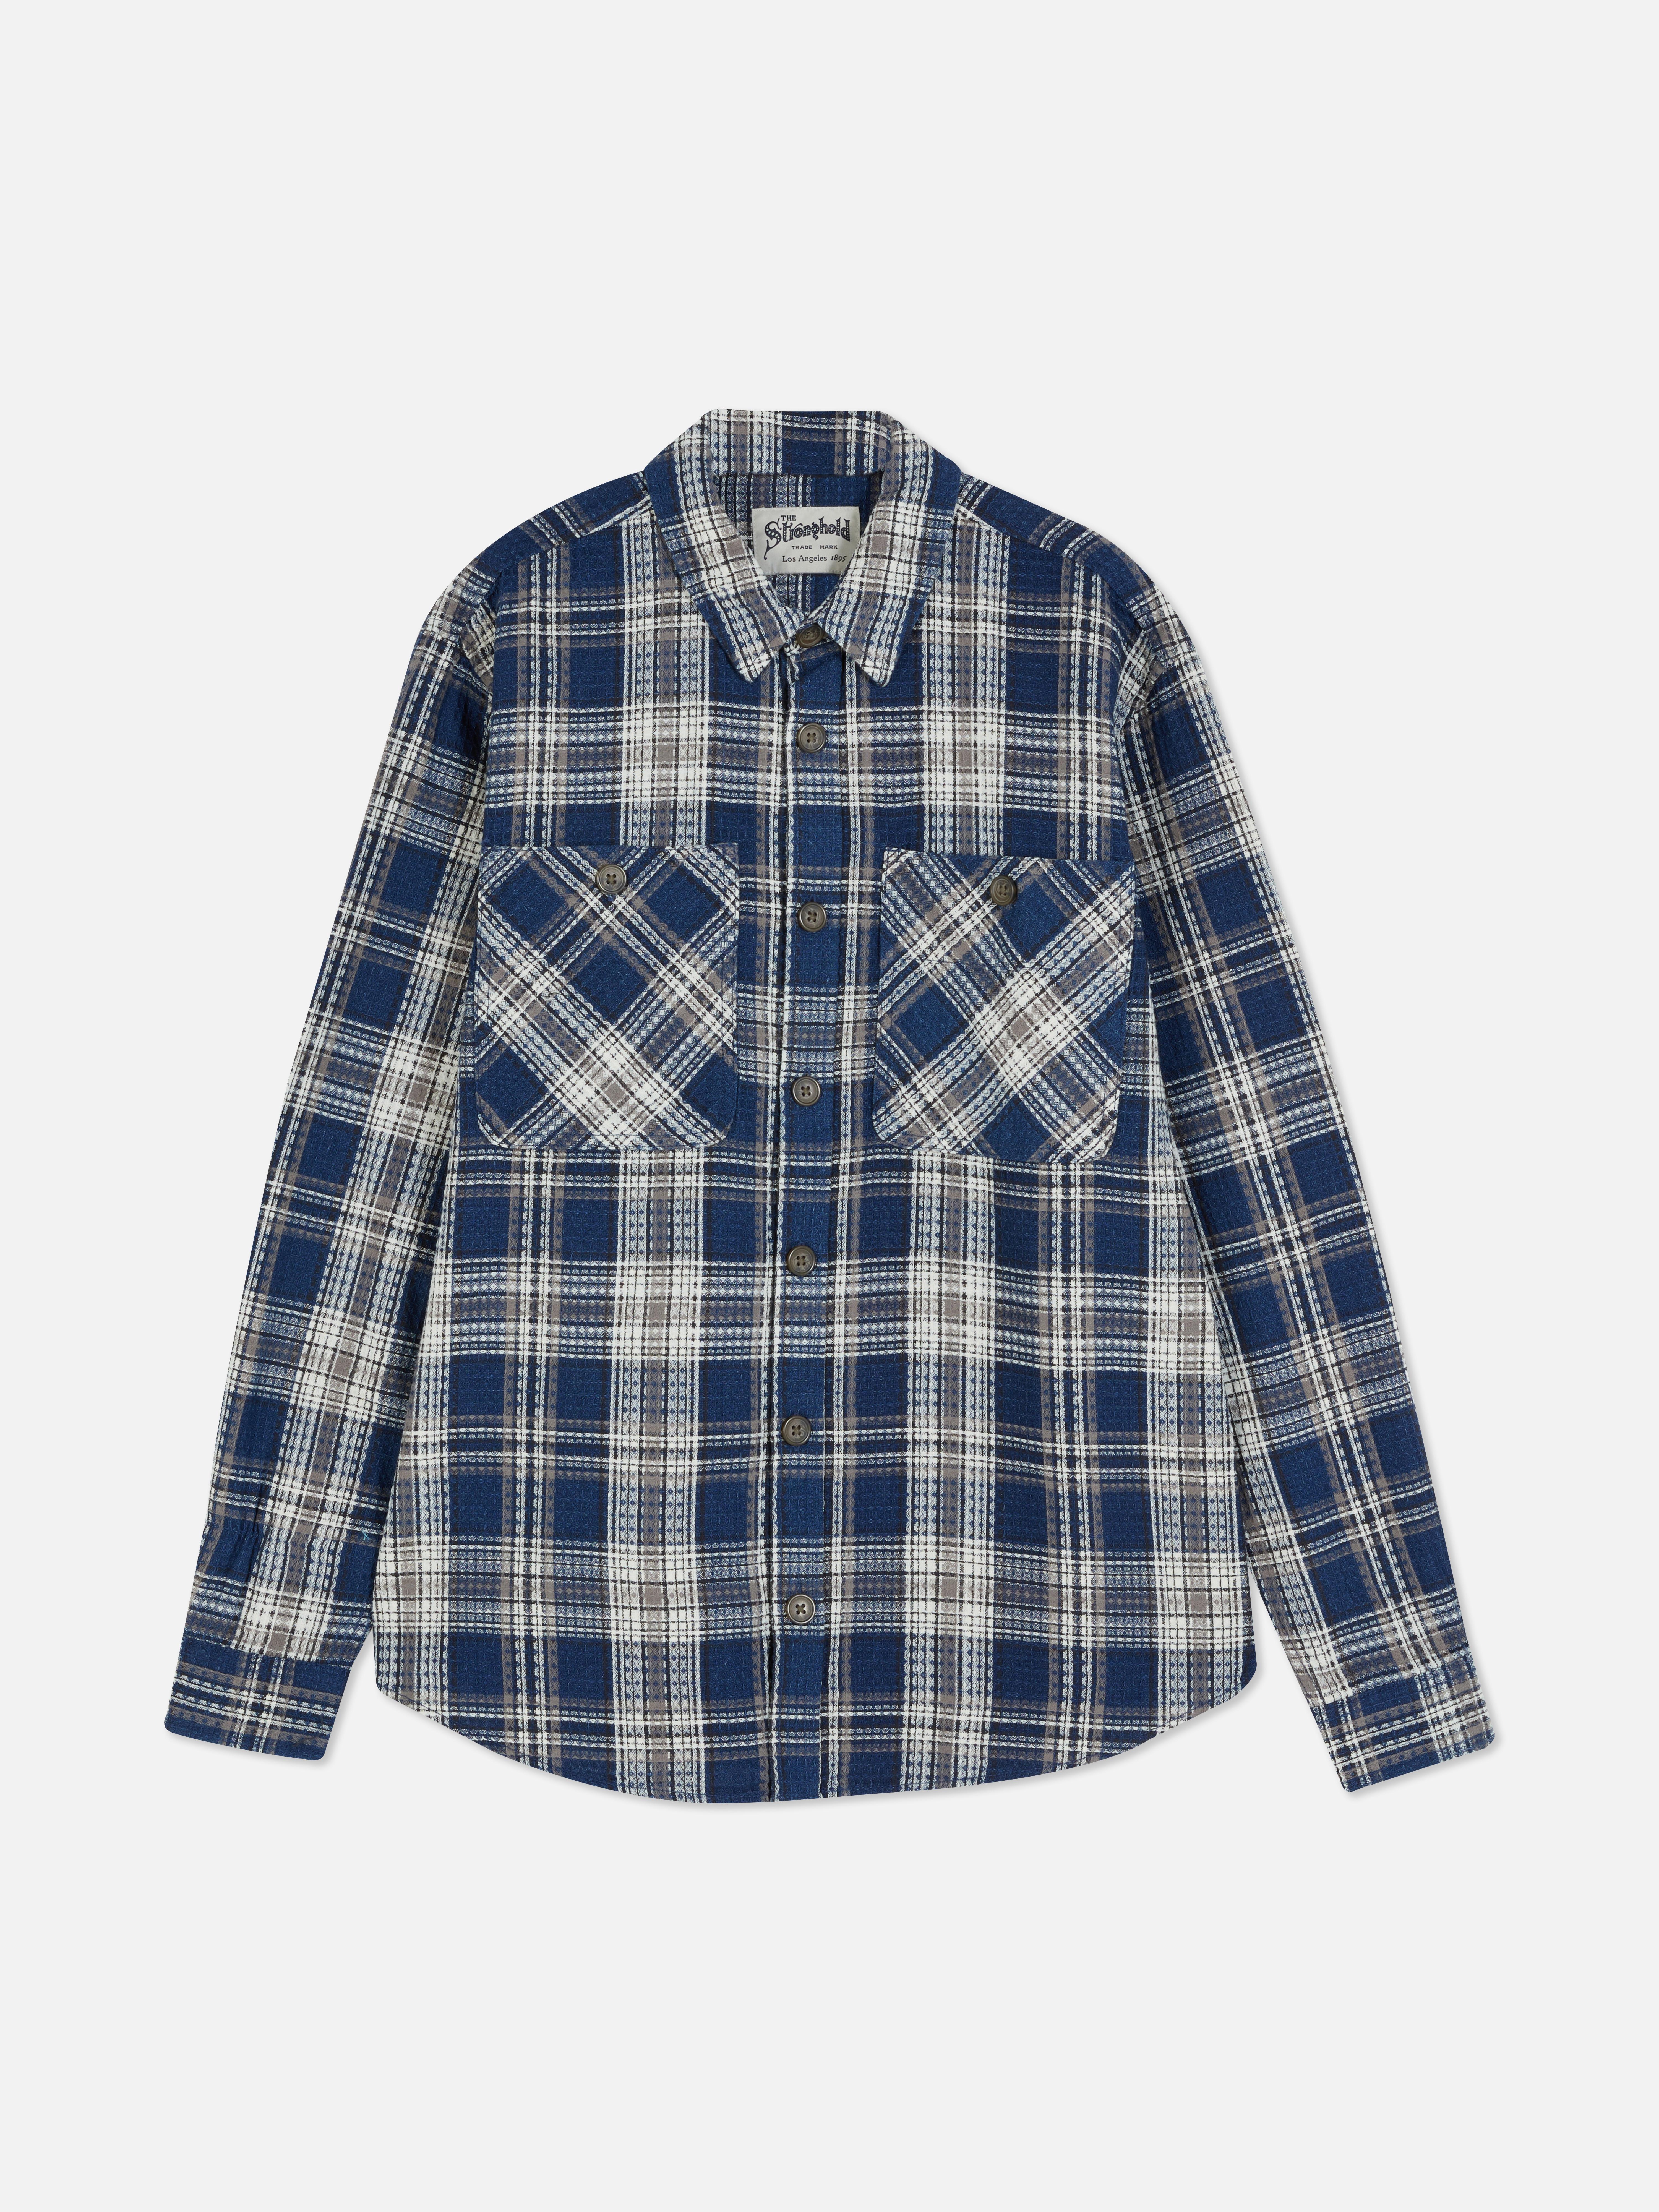 The Stronghold Textured Check Shirt